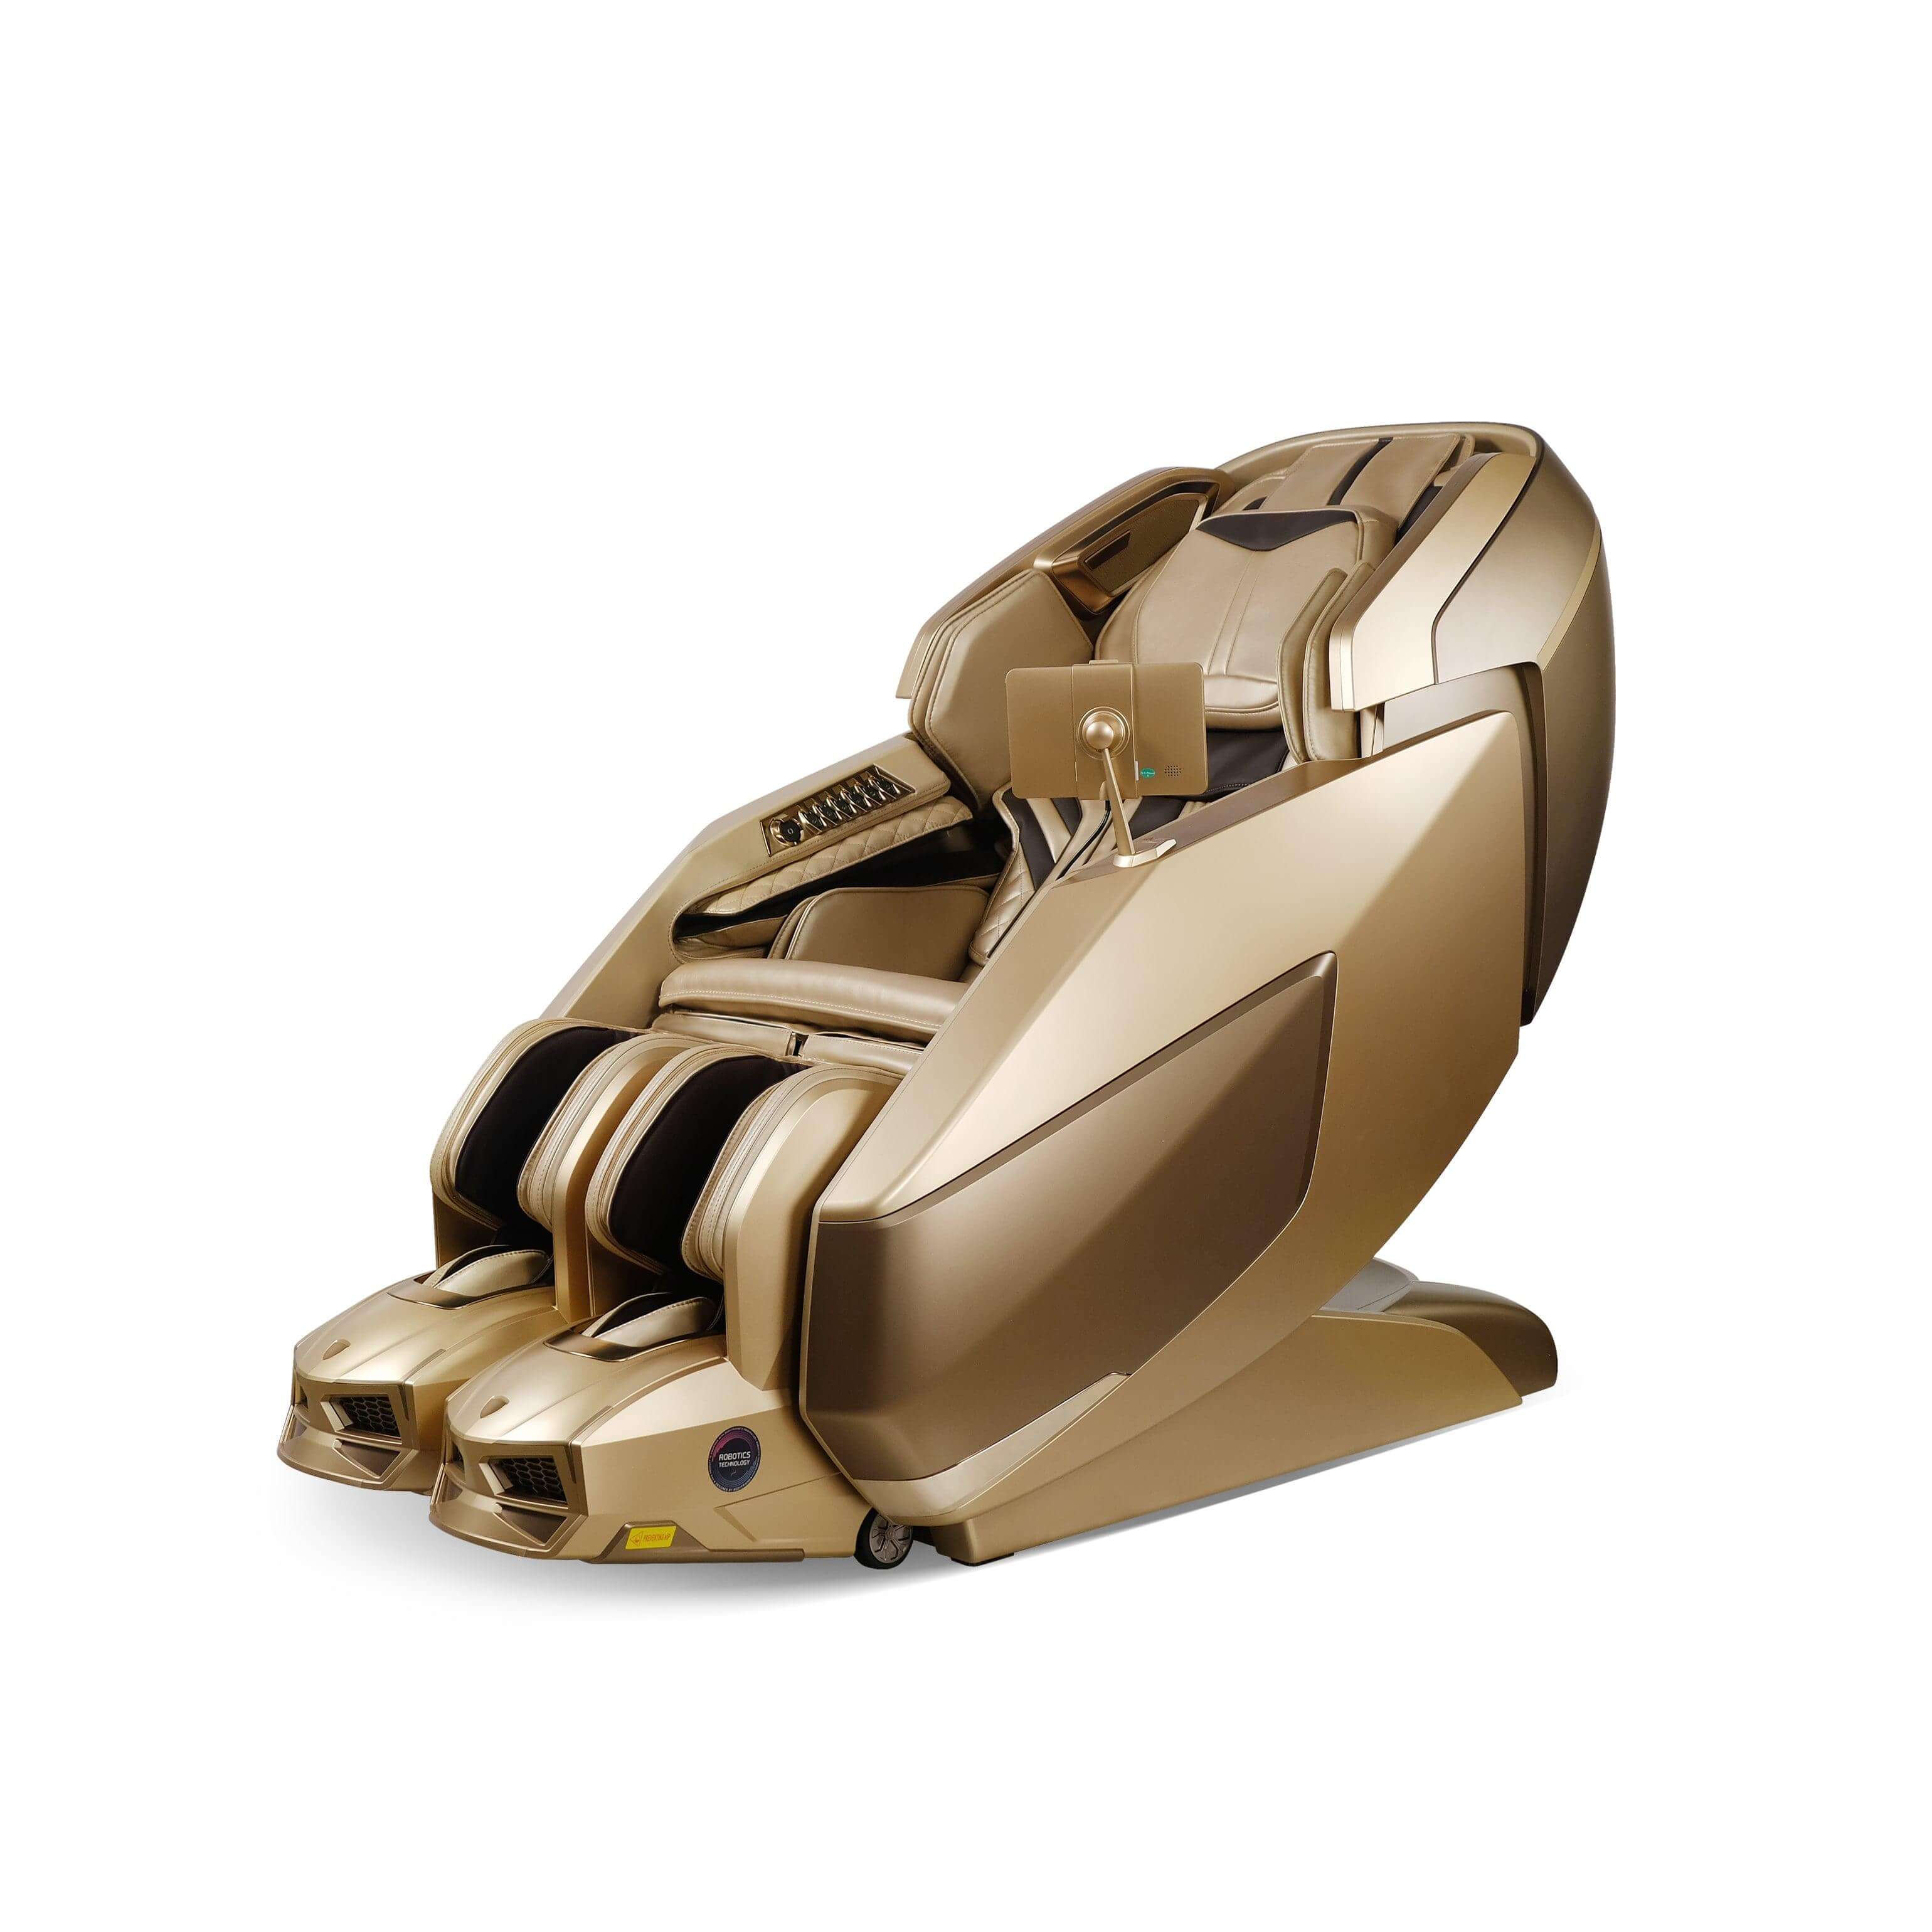 AI Robotic Massage Chair in Sleek Golden with Rovo Walking Technology and full-body airbags - Best massage chair UAE, Dubai